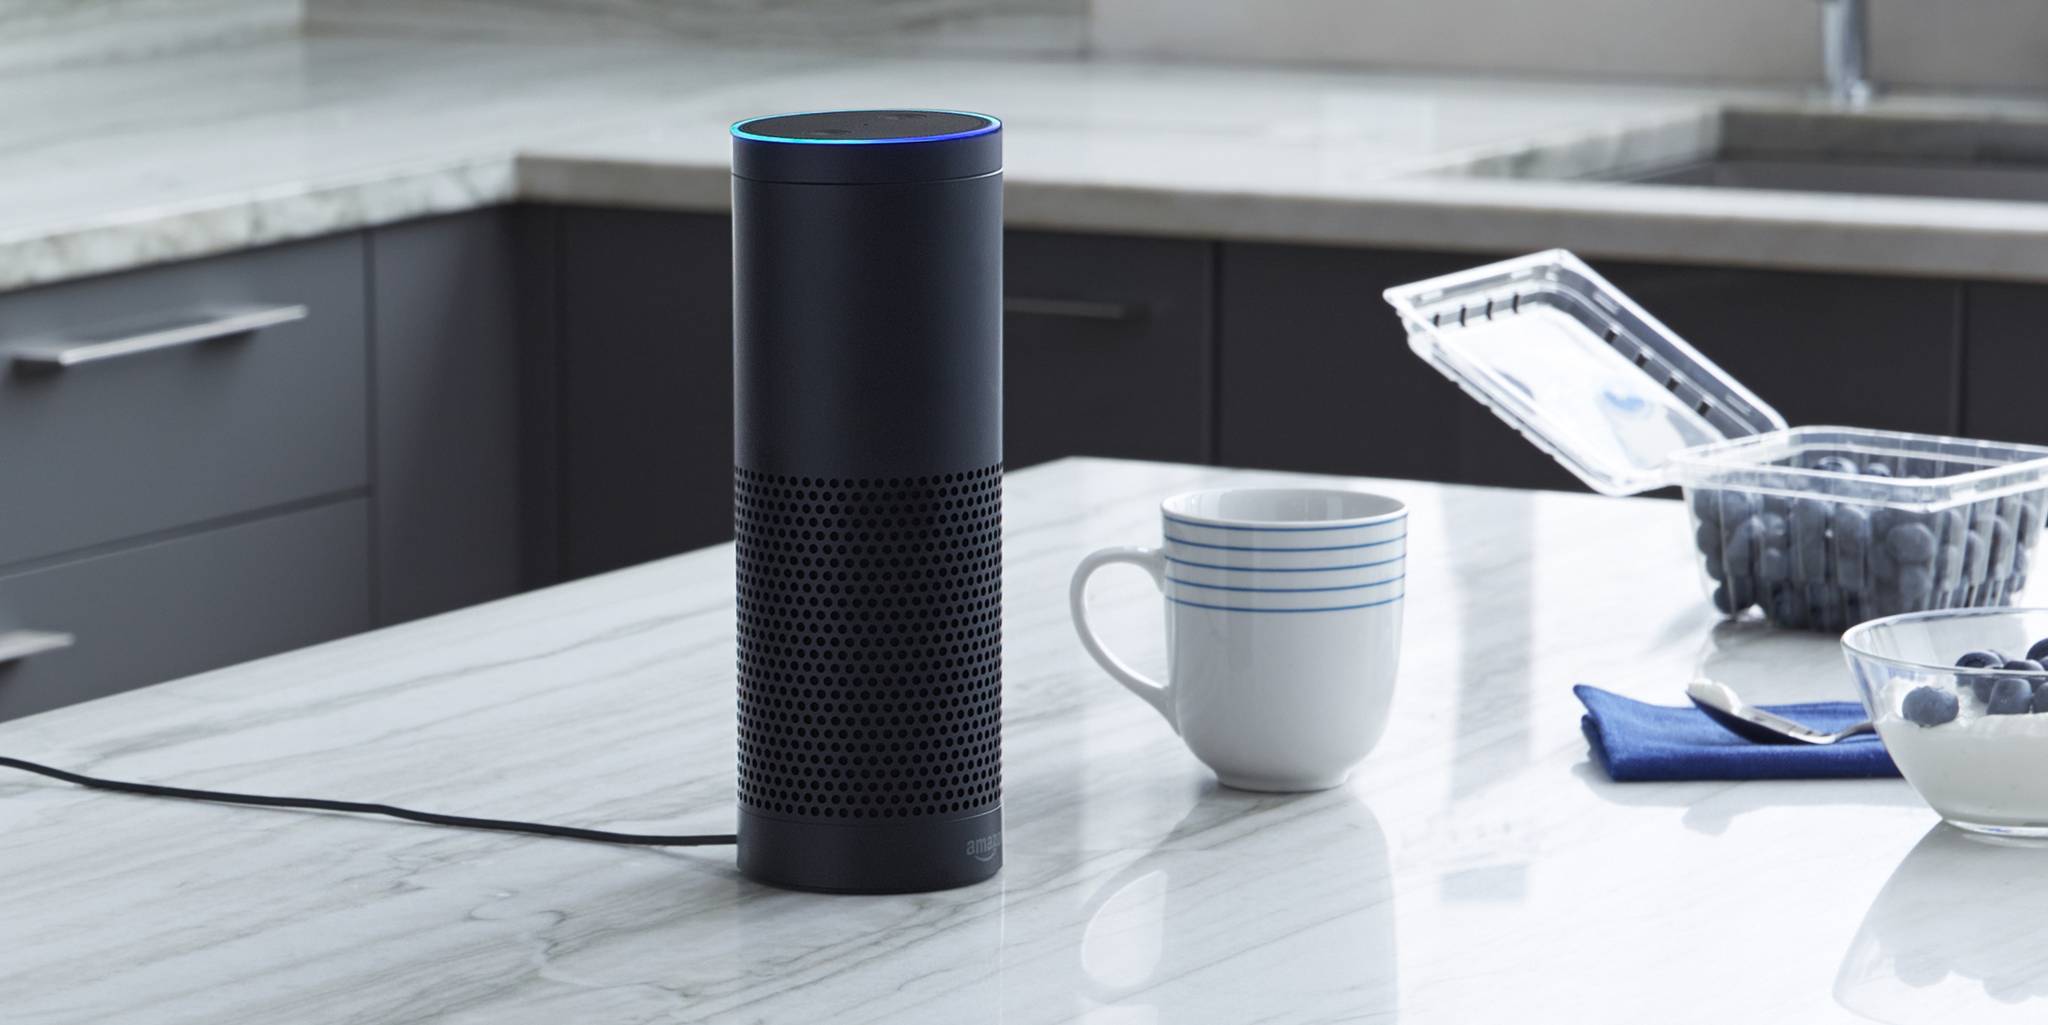 Things You Can Ask Alexa To Help Manage Your Calendar